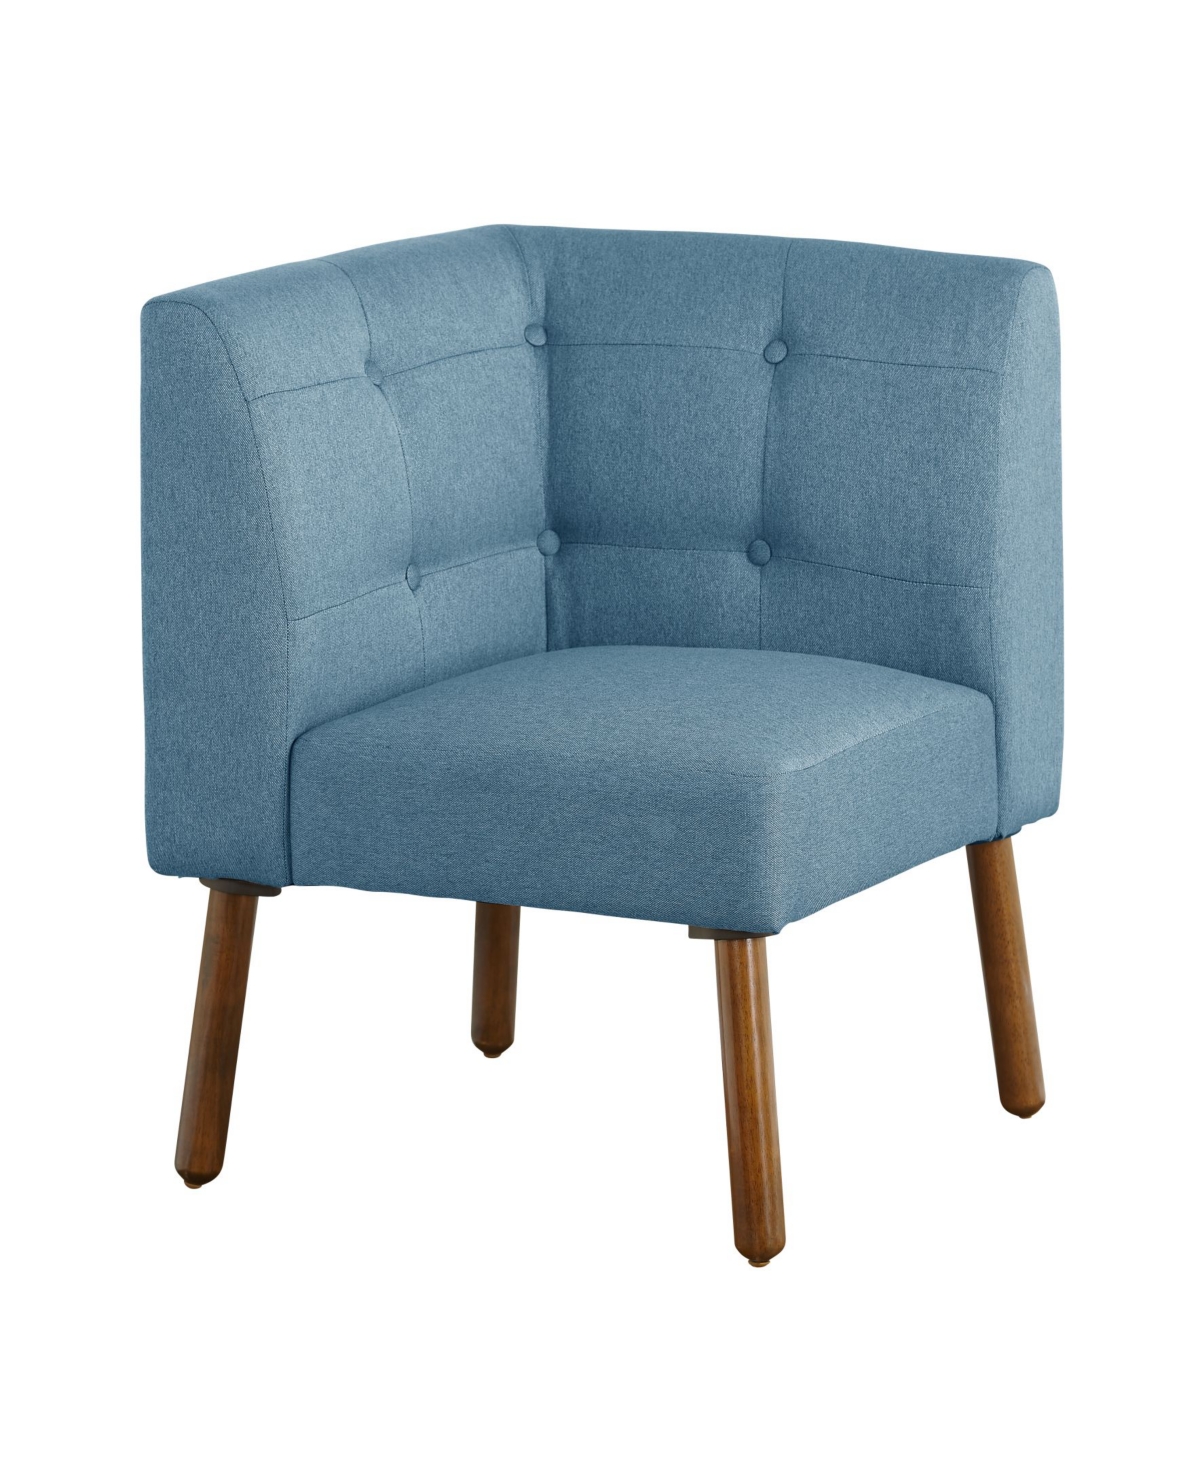 Buylateral Playmate Corner Chair